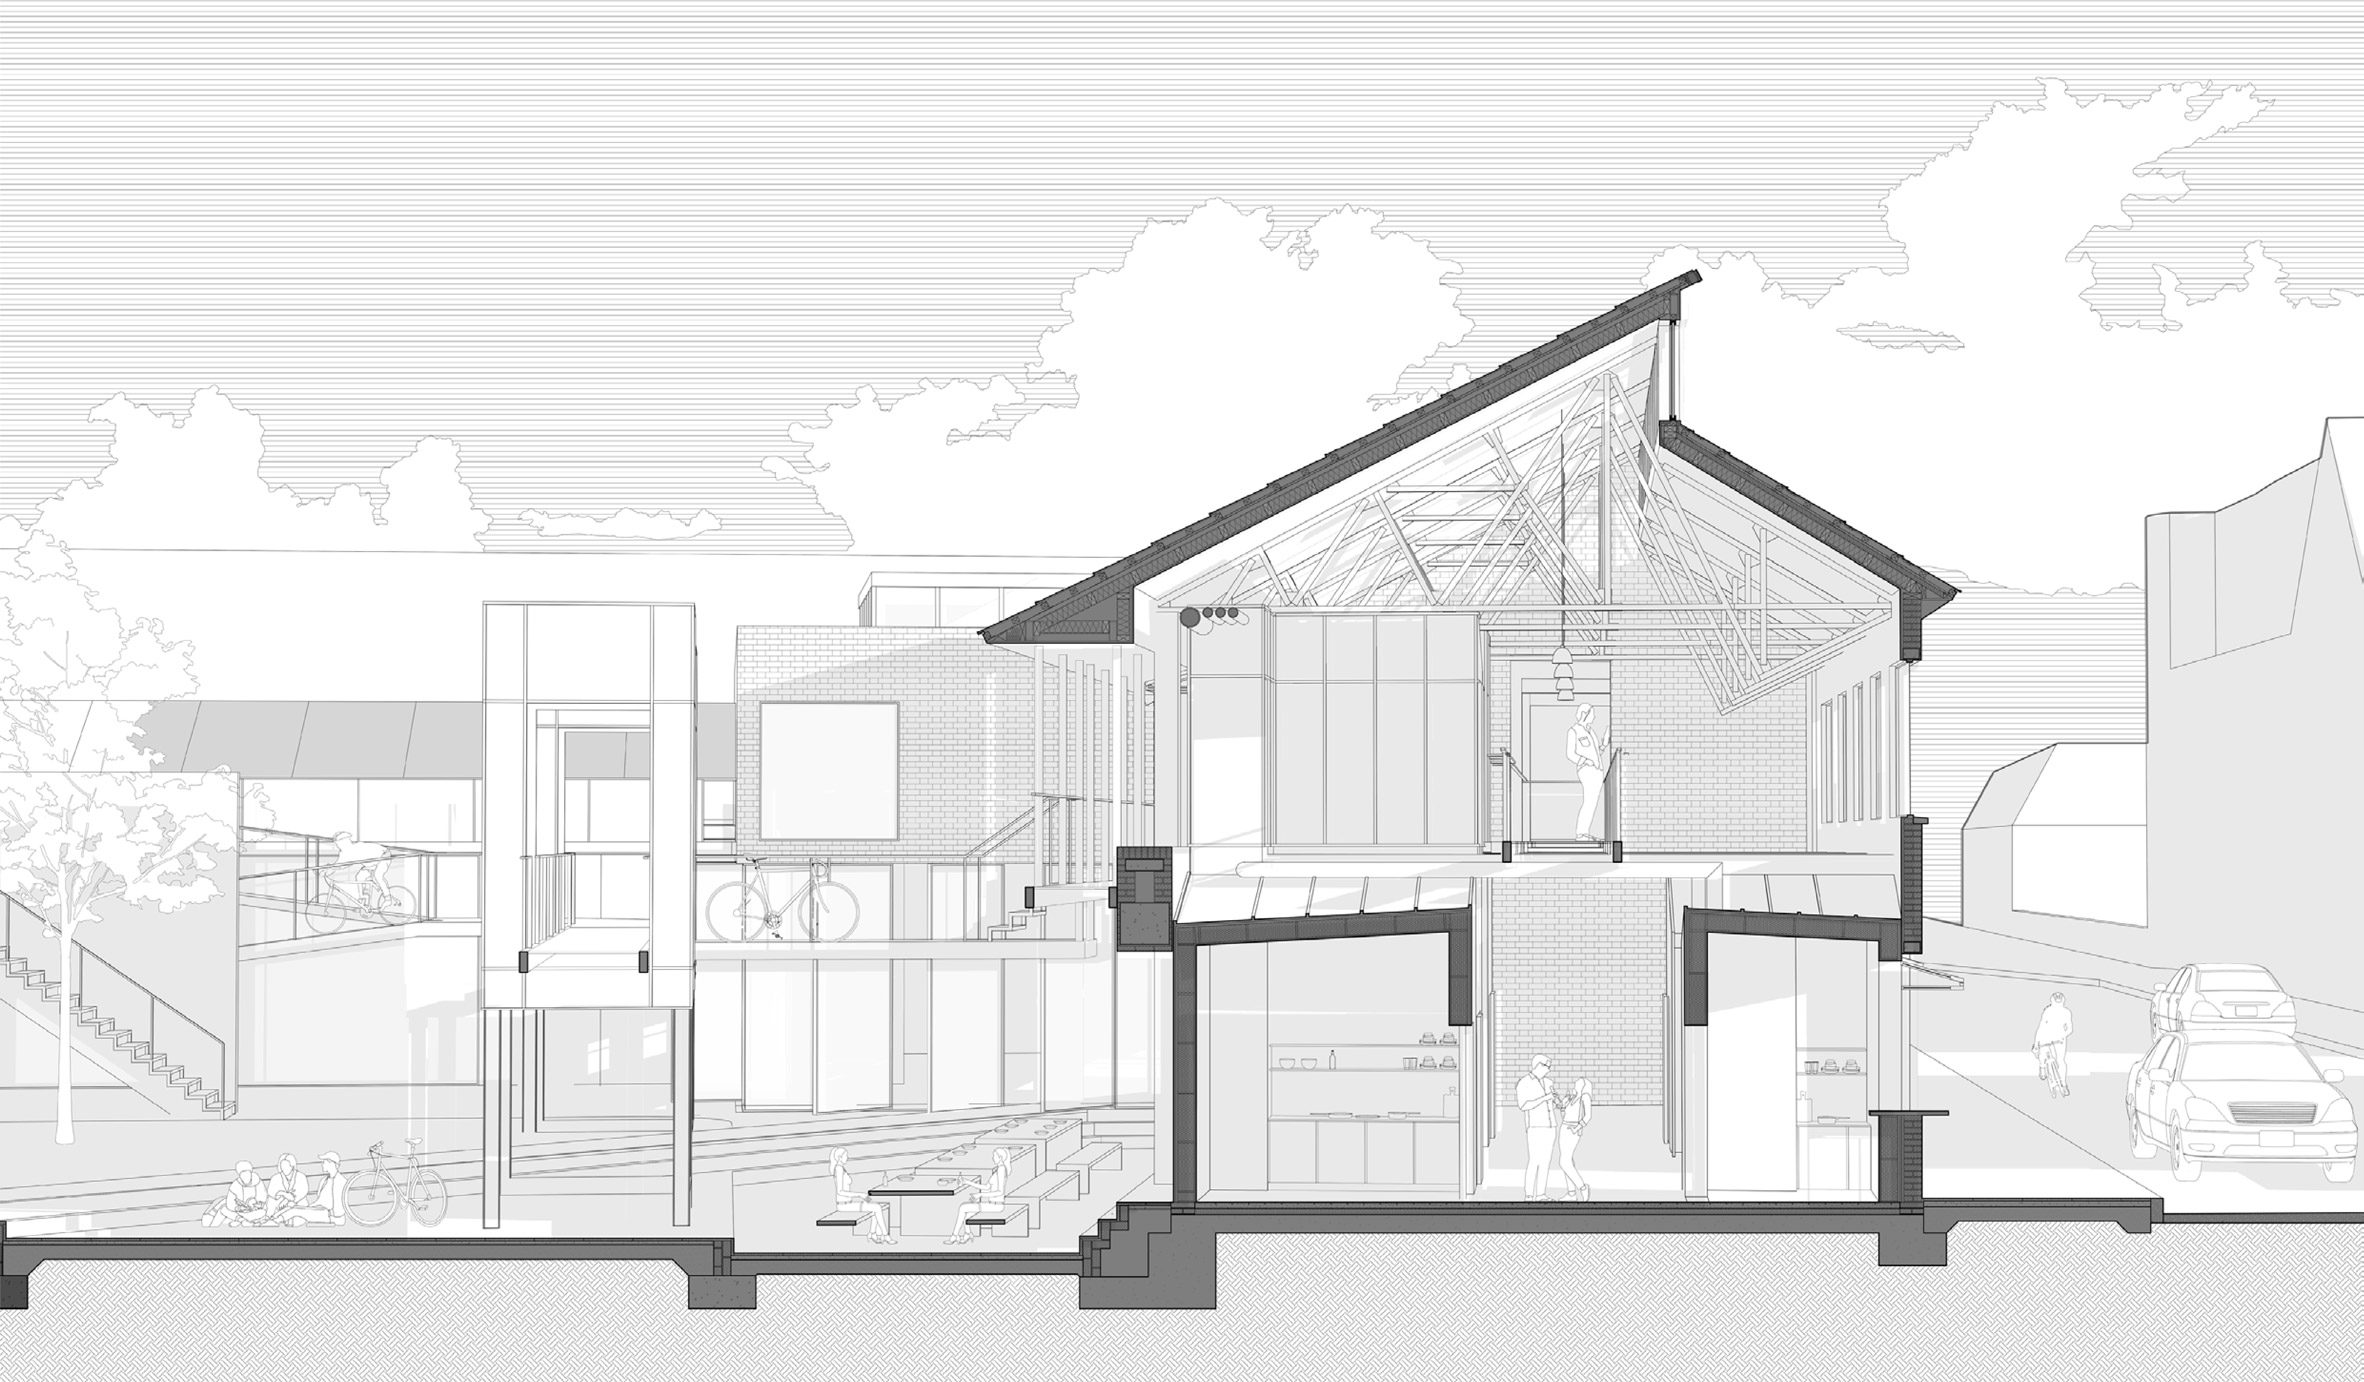 Greyscale perspective section of a pitched roof residential building